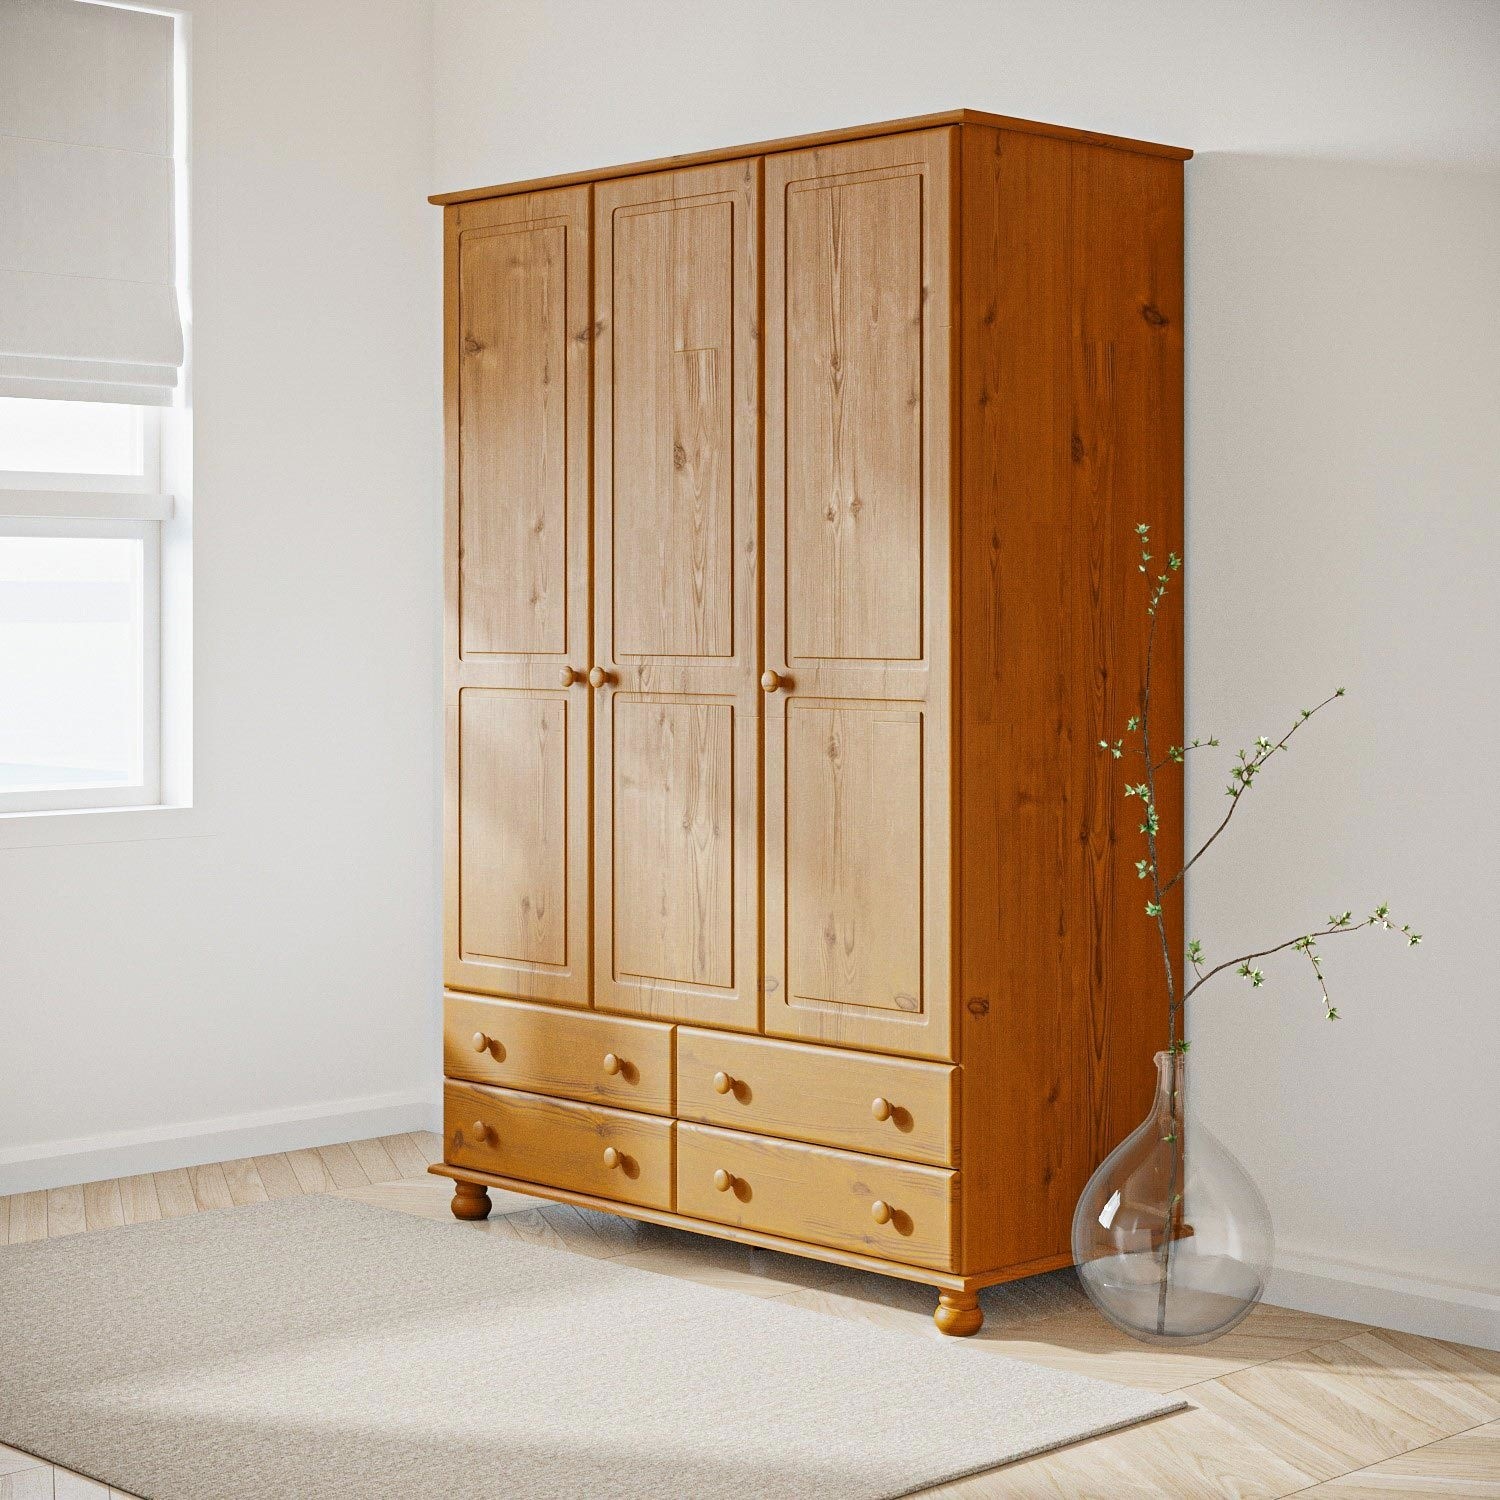  solid pine each and every item in the collection features the same style and detail as ot Solid Pine Furniture